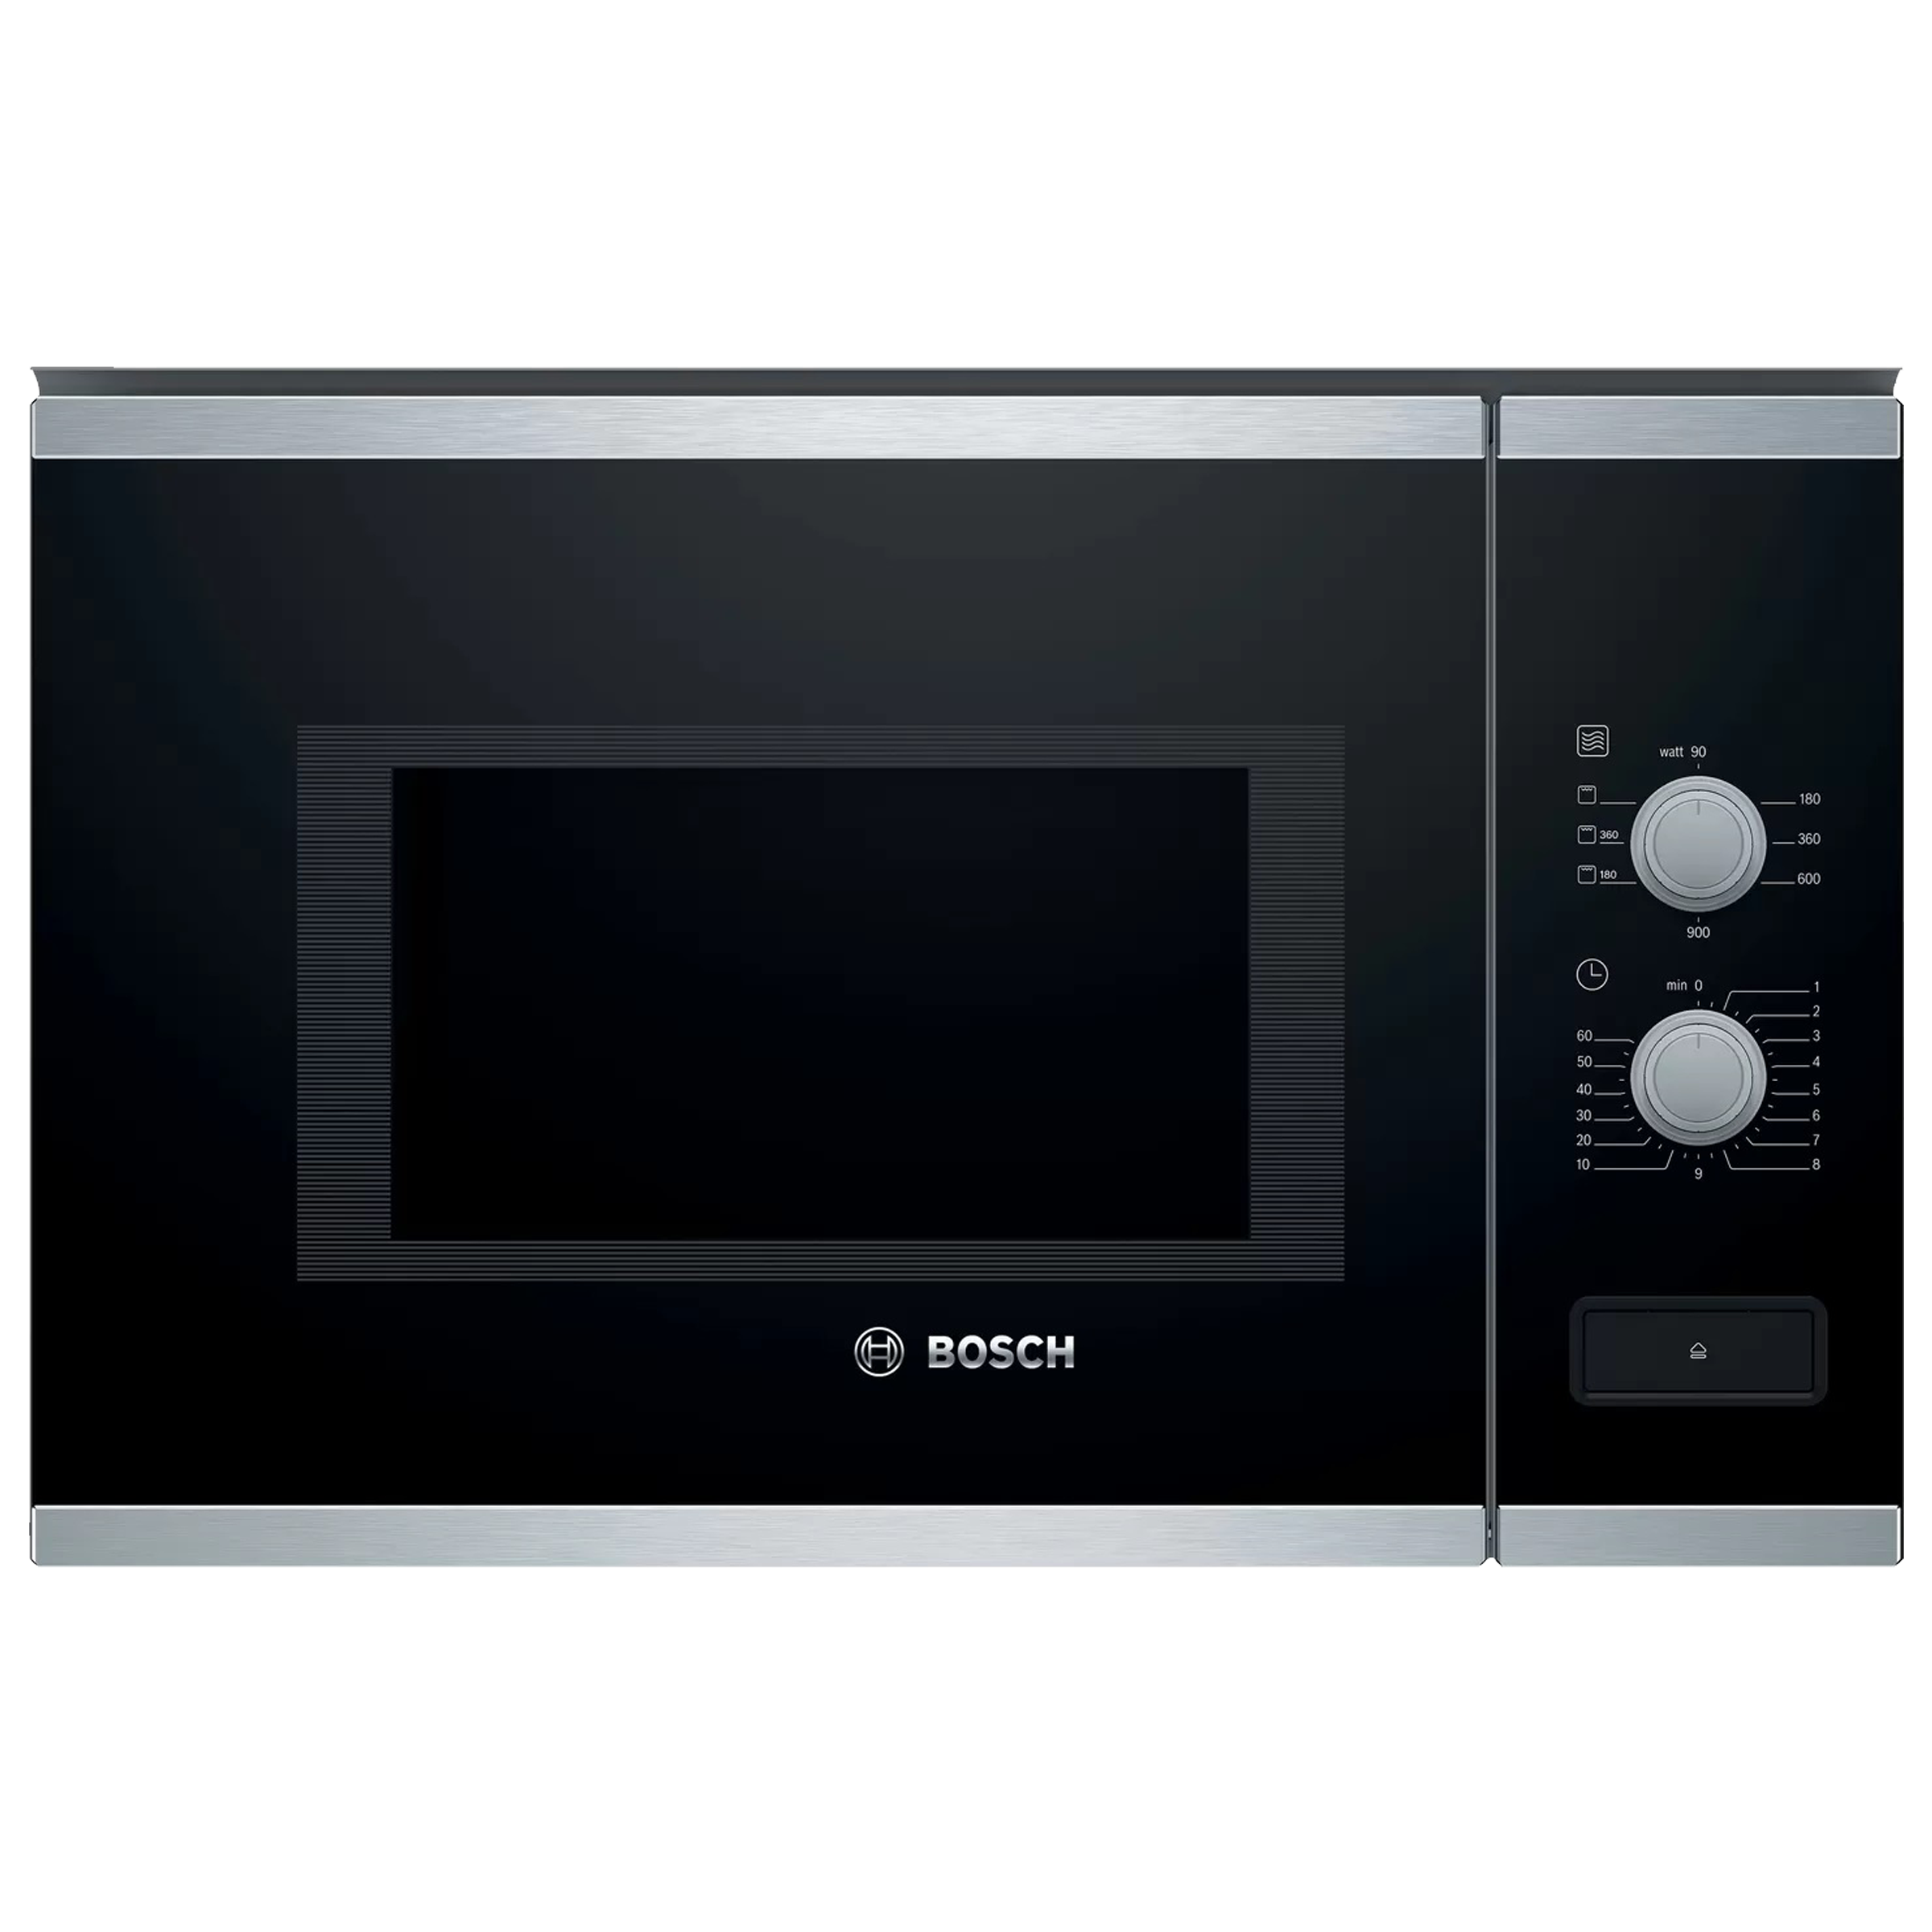 Bosch Serie 4 25 Litres Built-in Microwave Oven (Automatic Safety Switch Off, BEL550MS0I, Black/Silver)_1